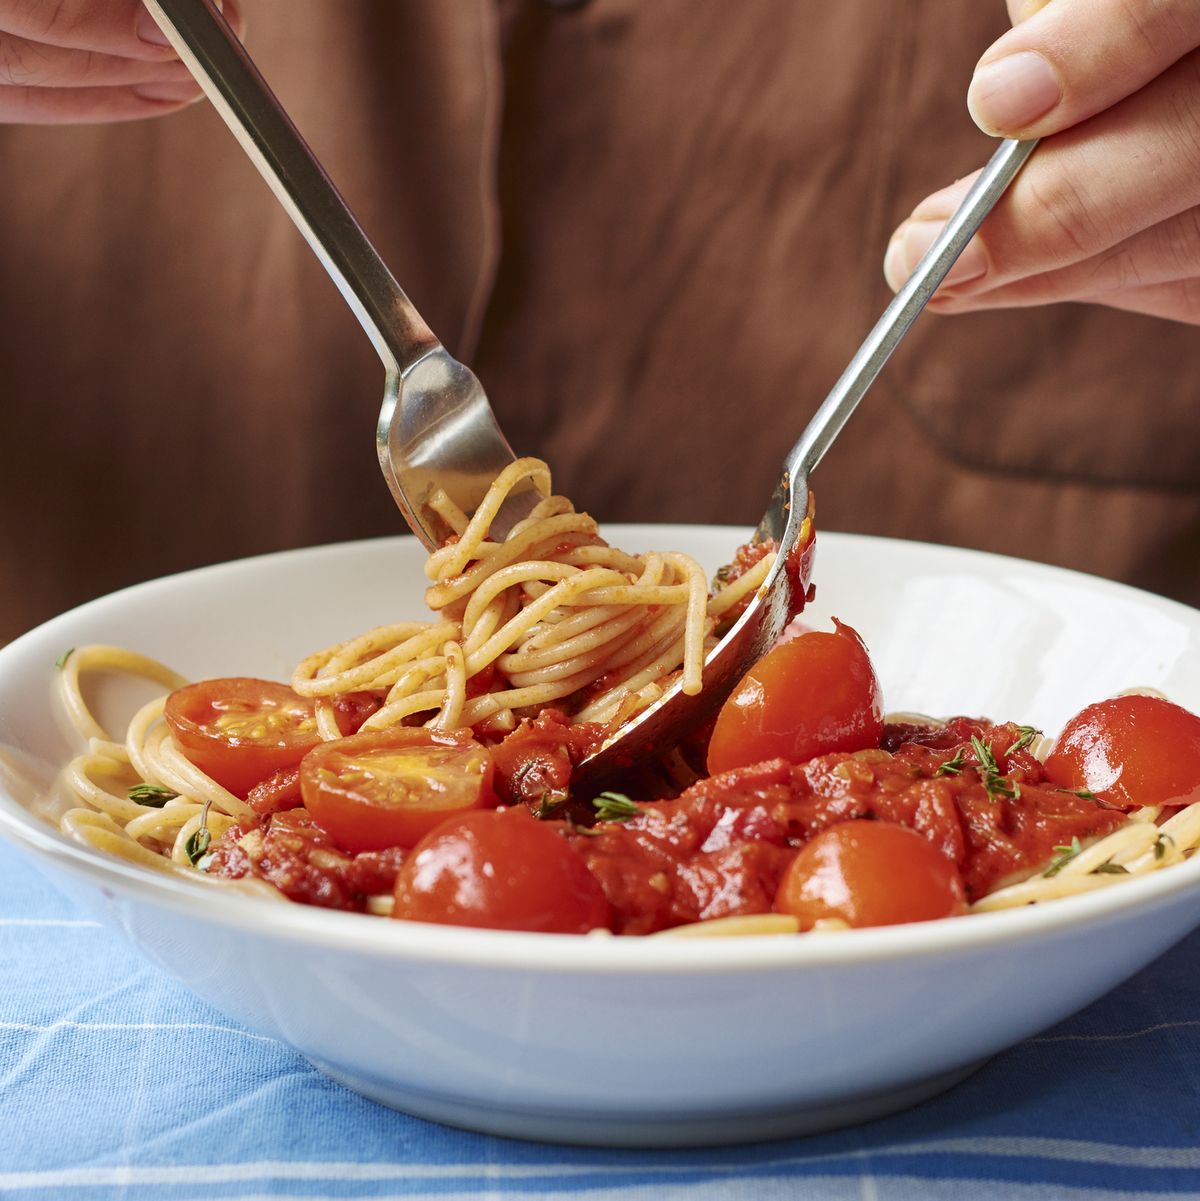 Man eating spaghetti with tomato sauce, close-up